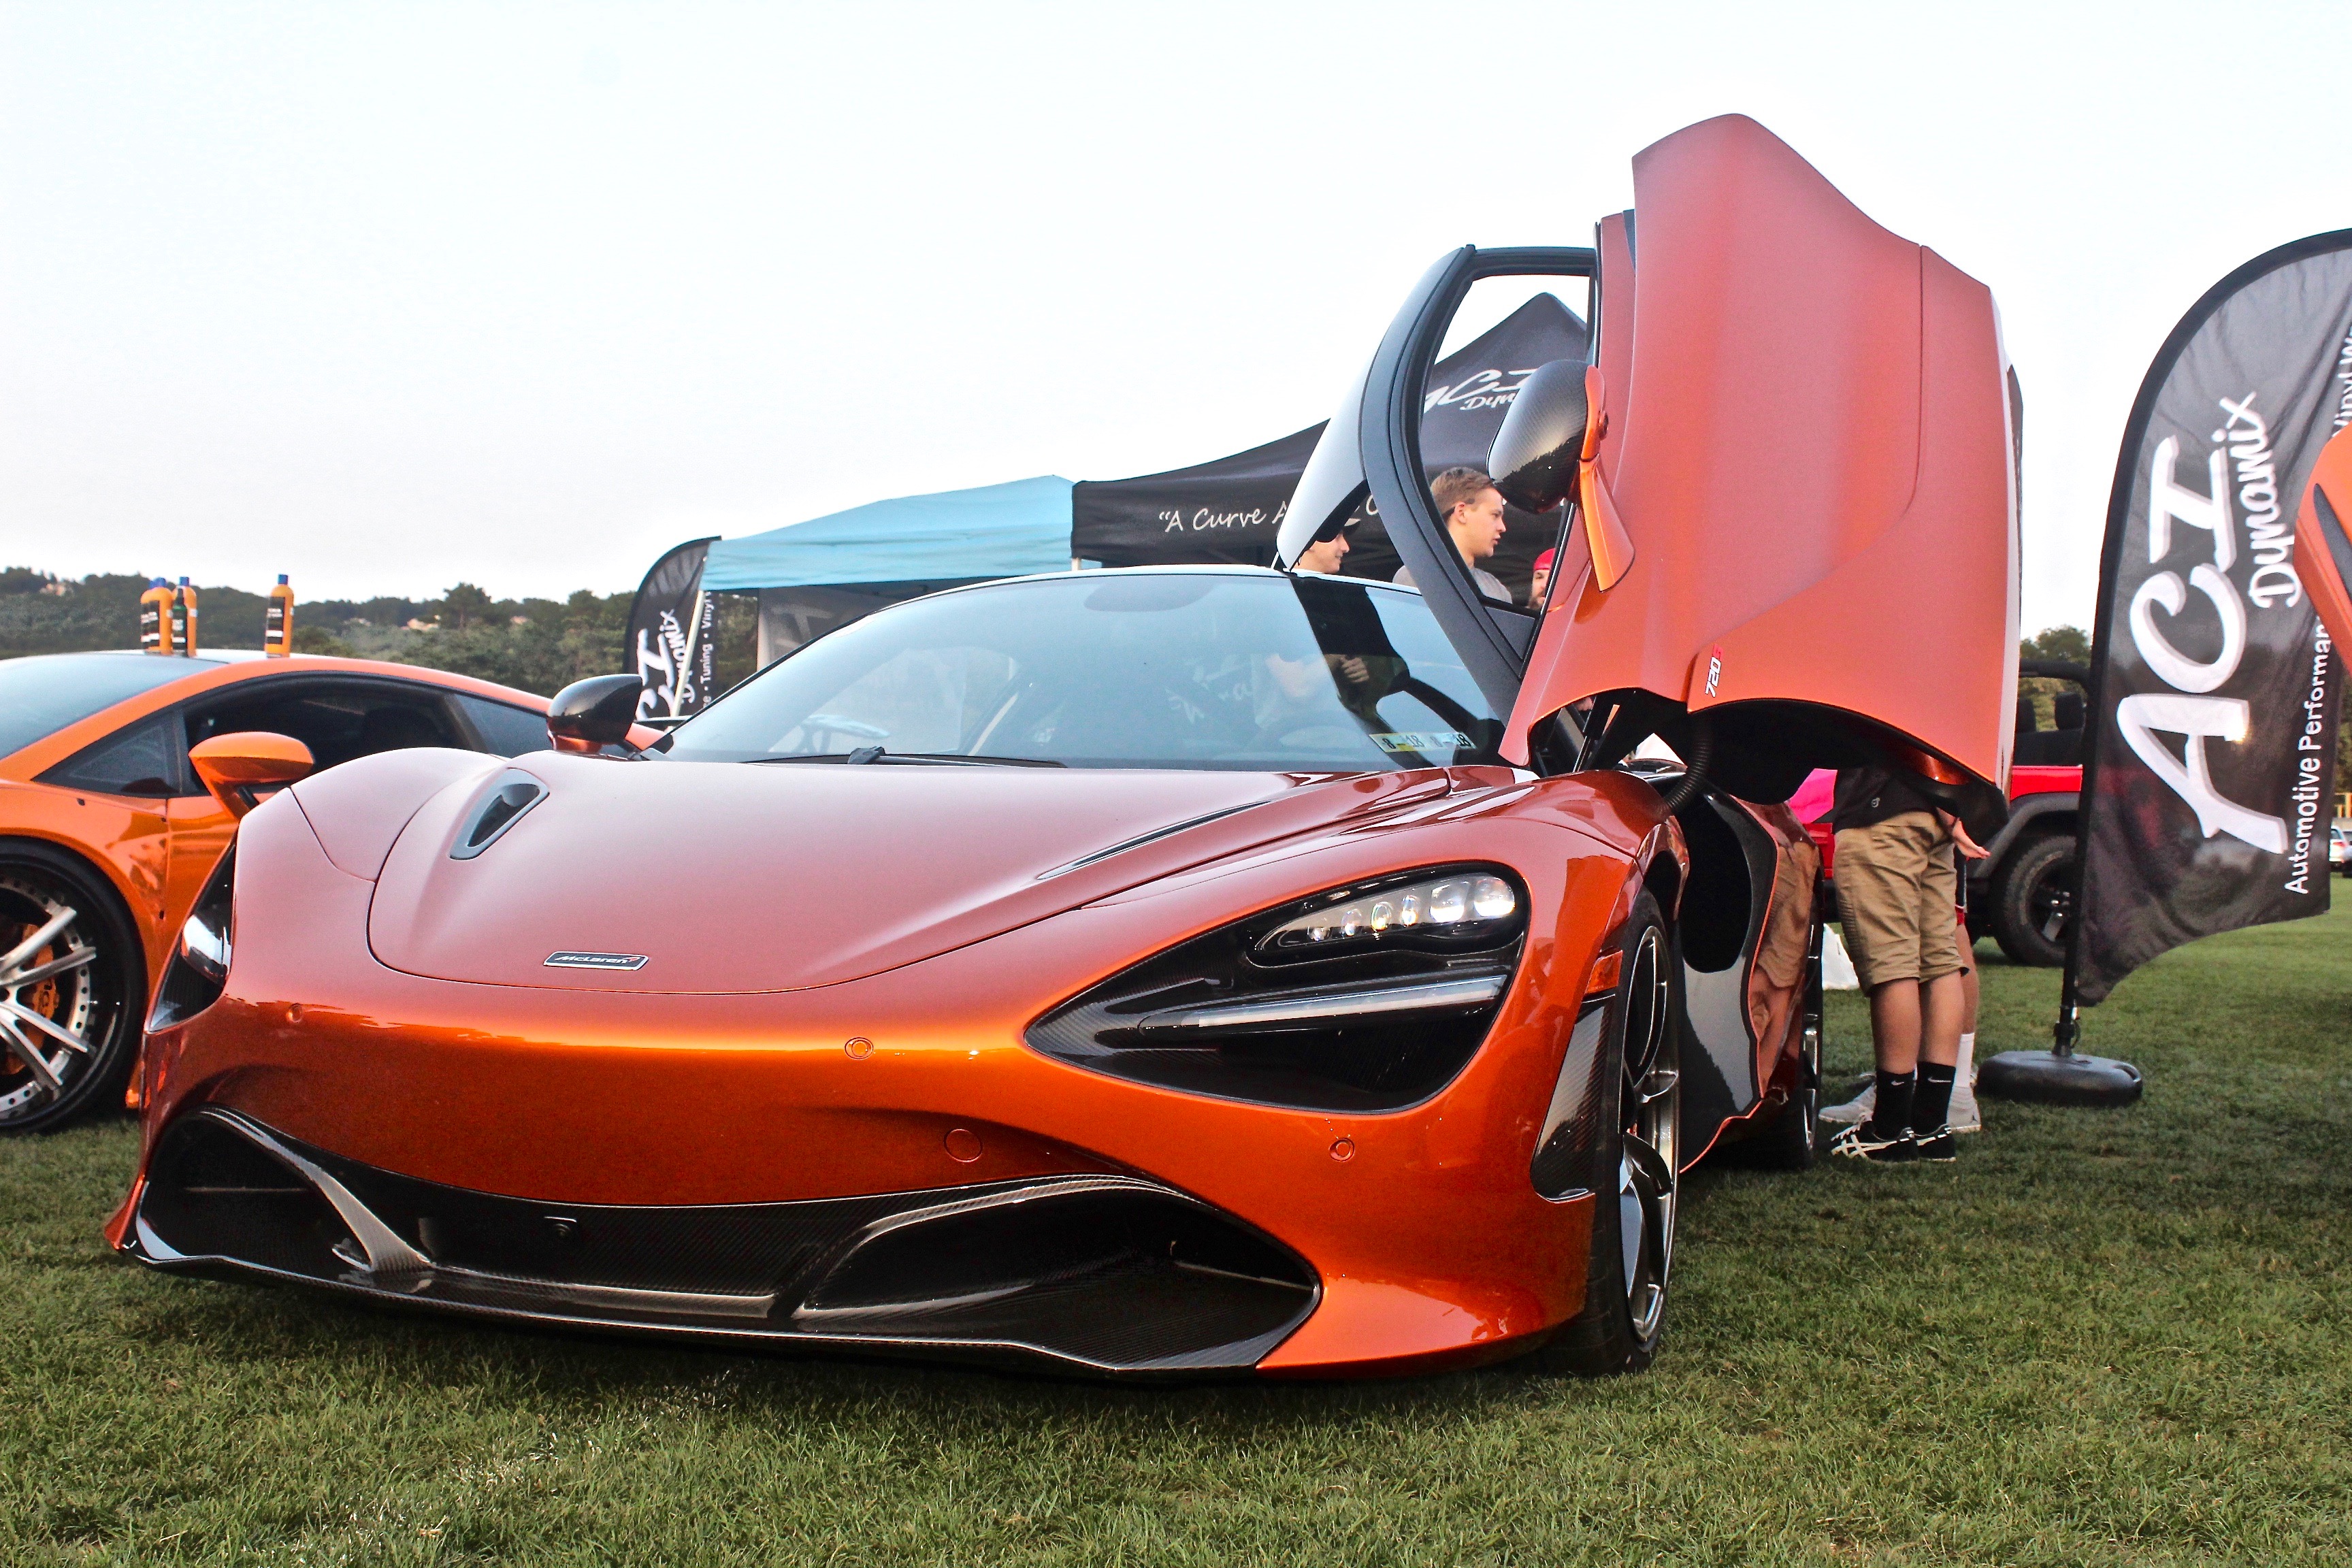 Opinion: The McLaren 720s signals a new era in Supercars